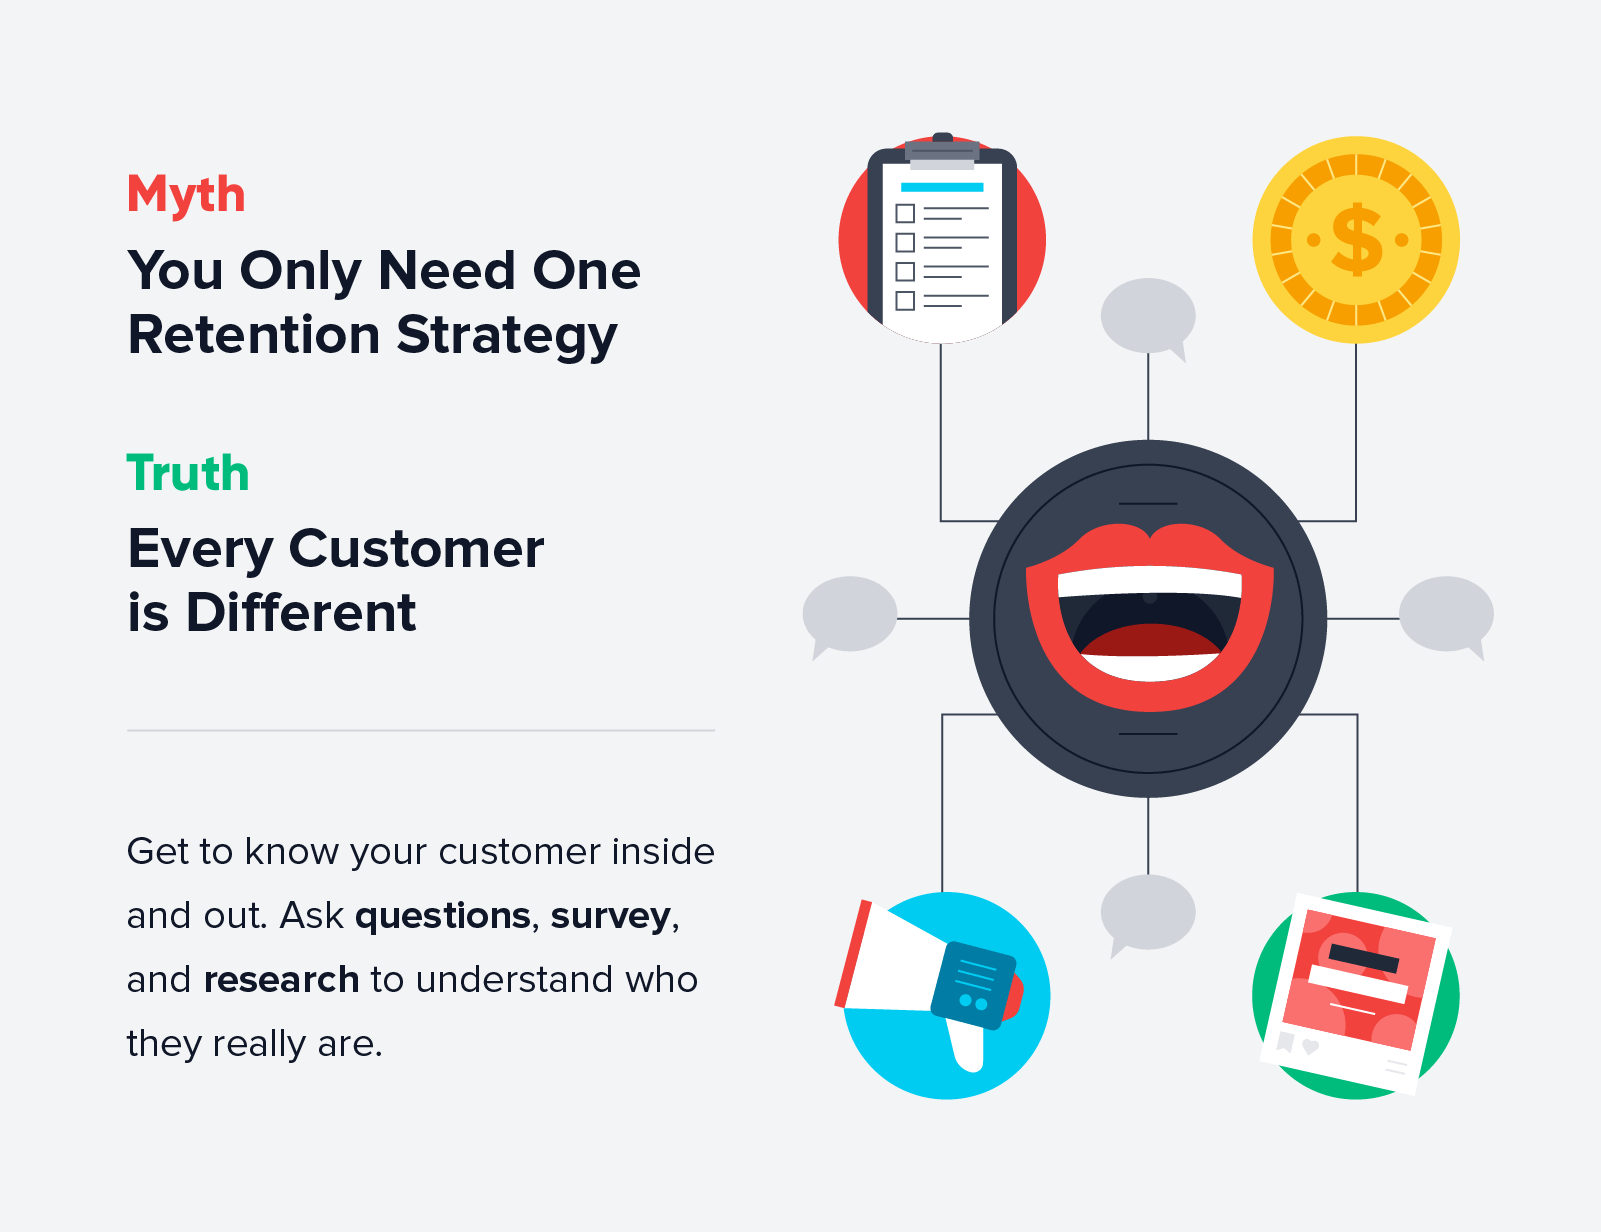 every customer is different